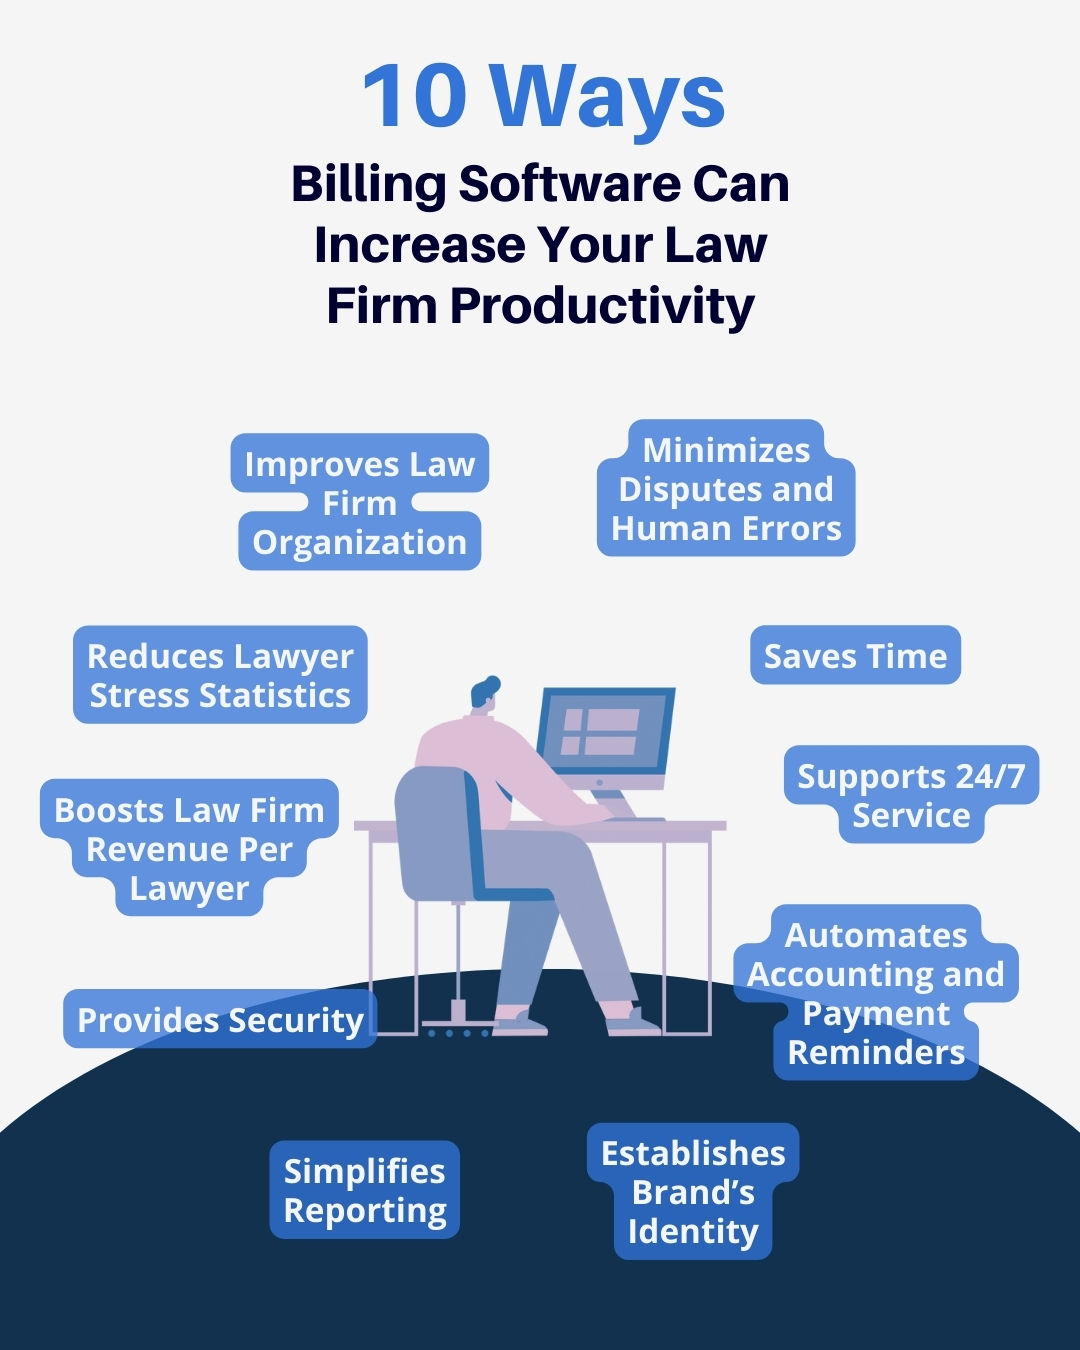 Ways to Increase Your Law Firm Productivity